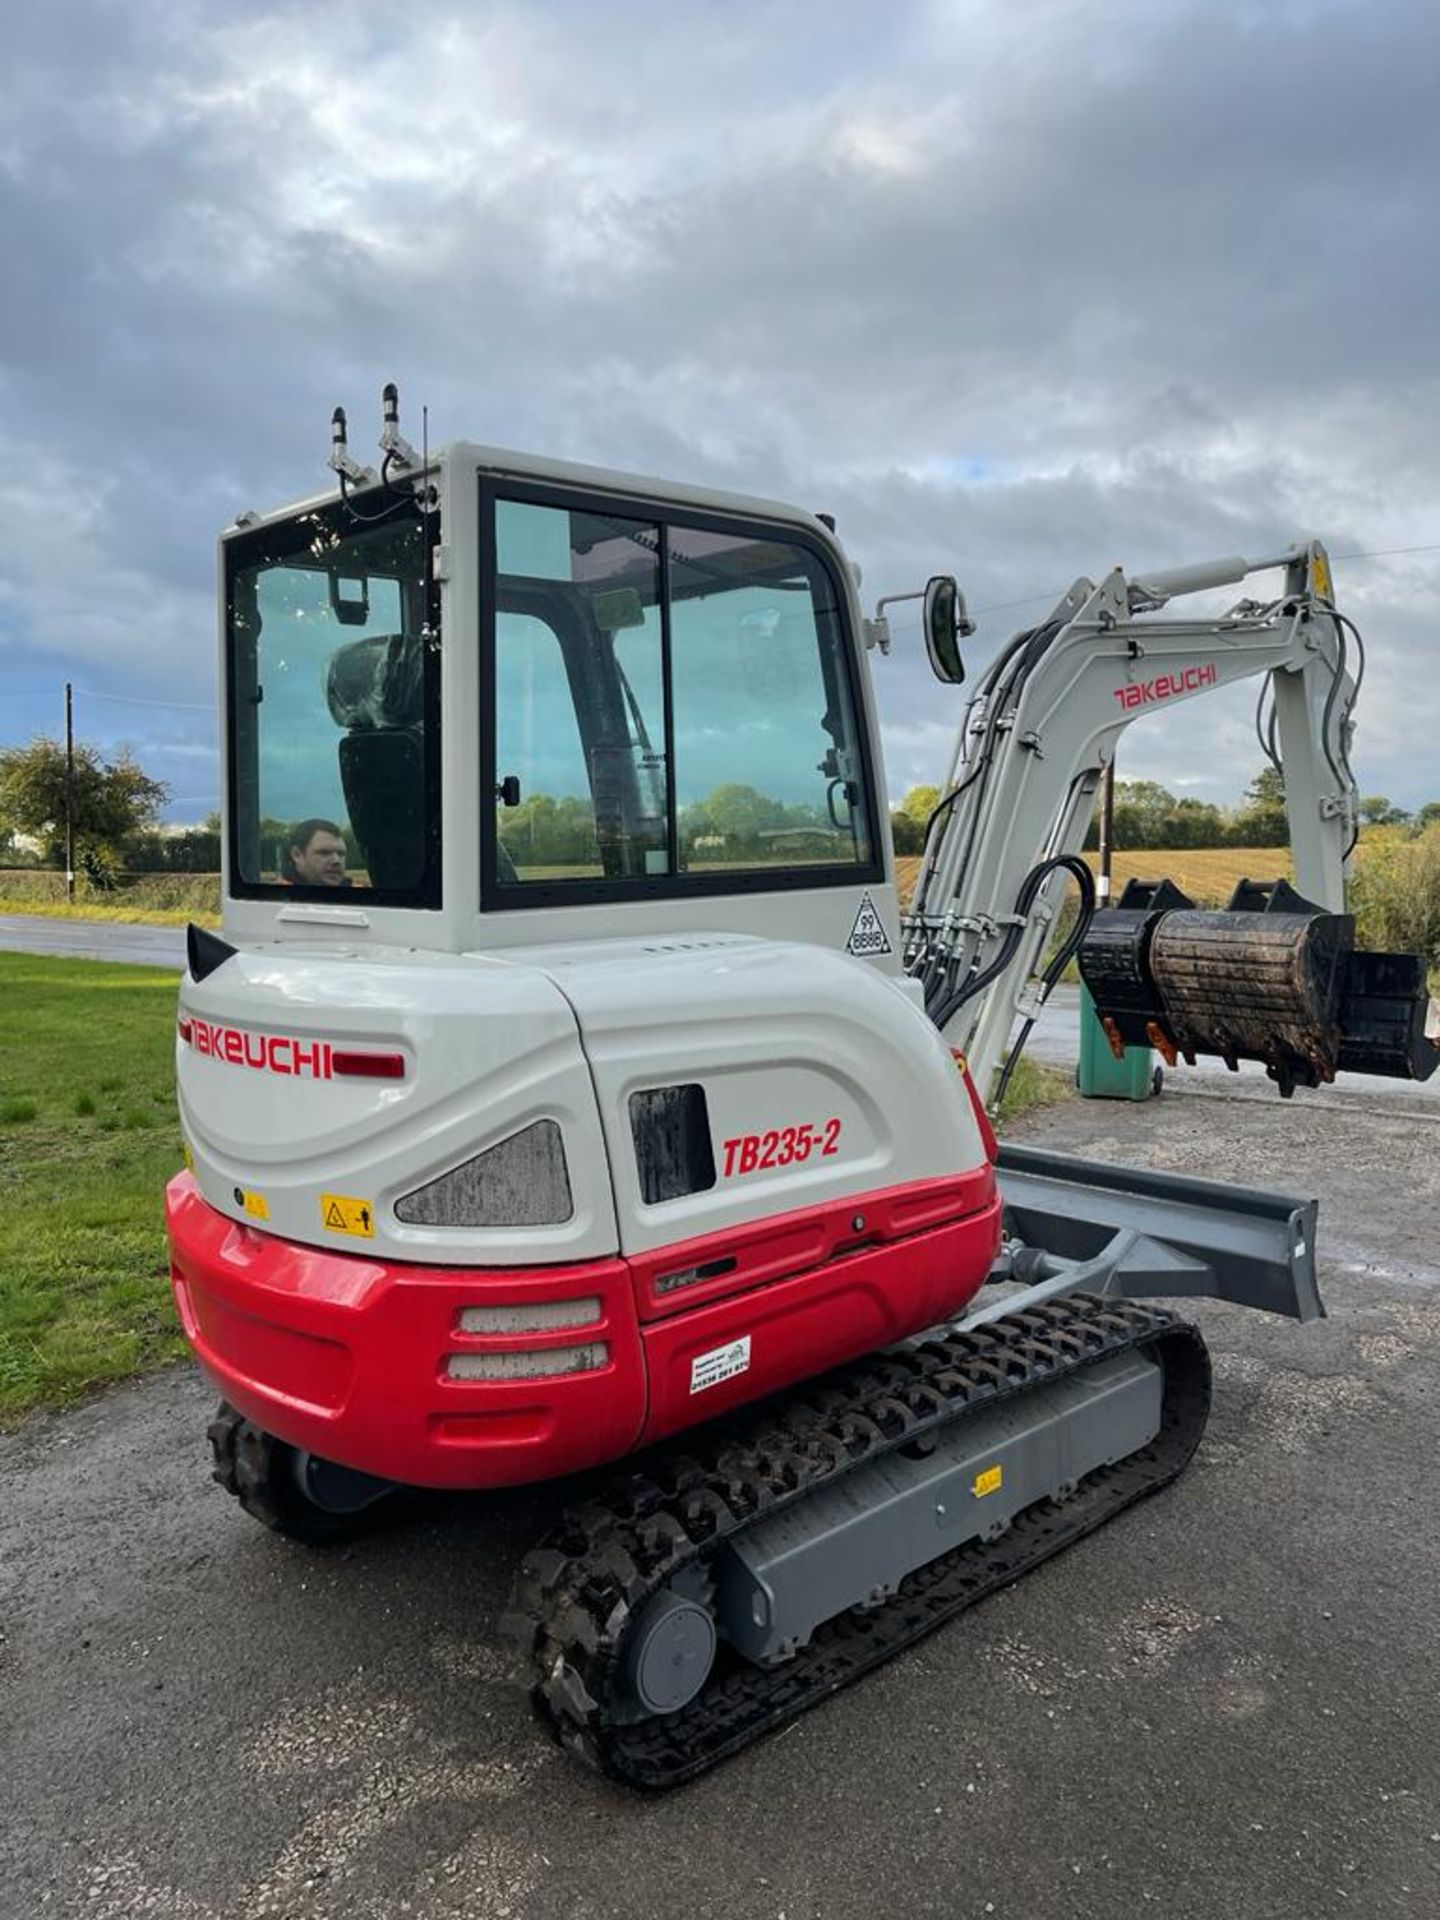 2021 ONLY 60 hrs ! Takeushi TB235 -2 3.5 Ton Excavator HYD QUICK HITCH *PLUS VAT* - Image 2 of 5